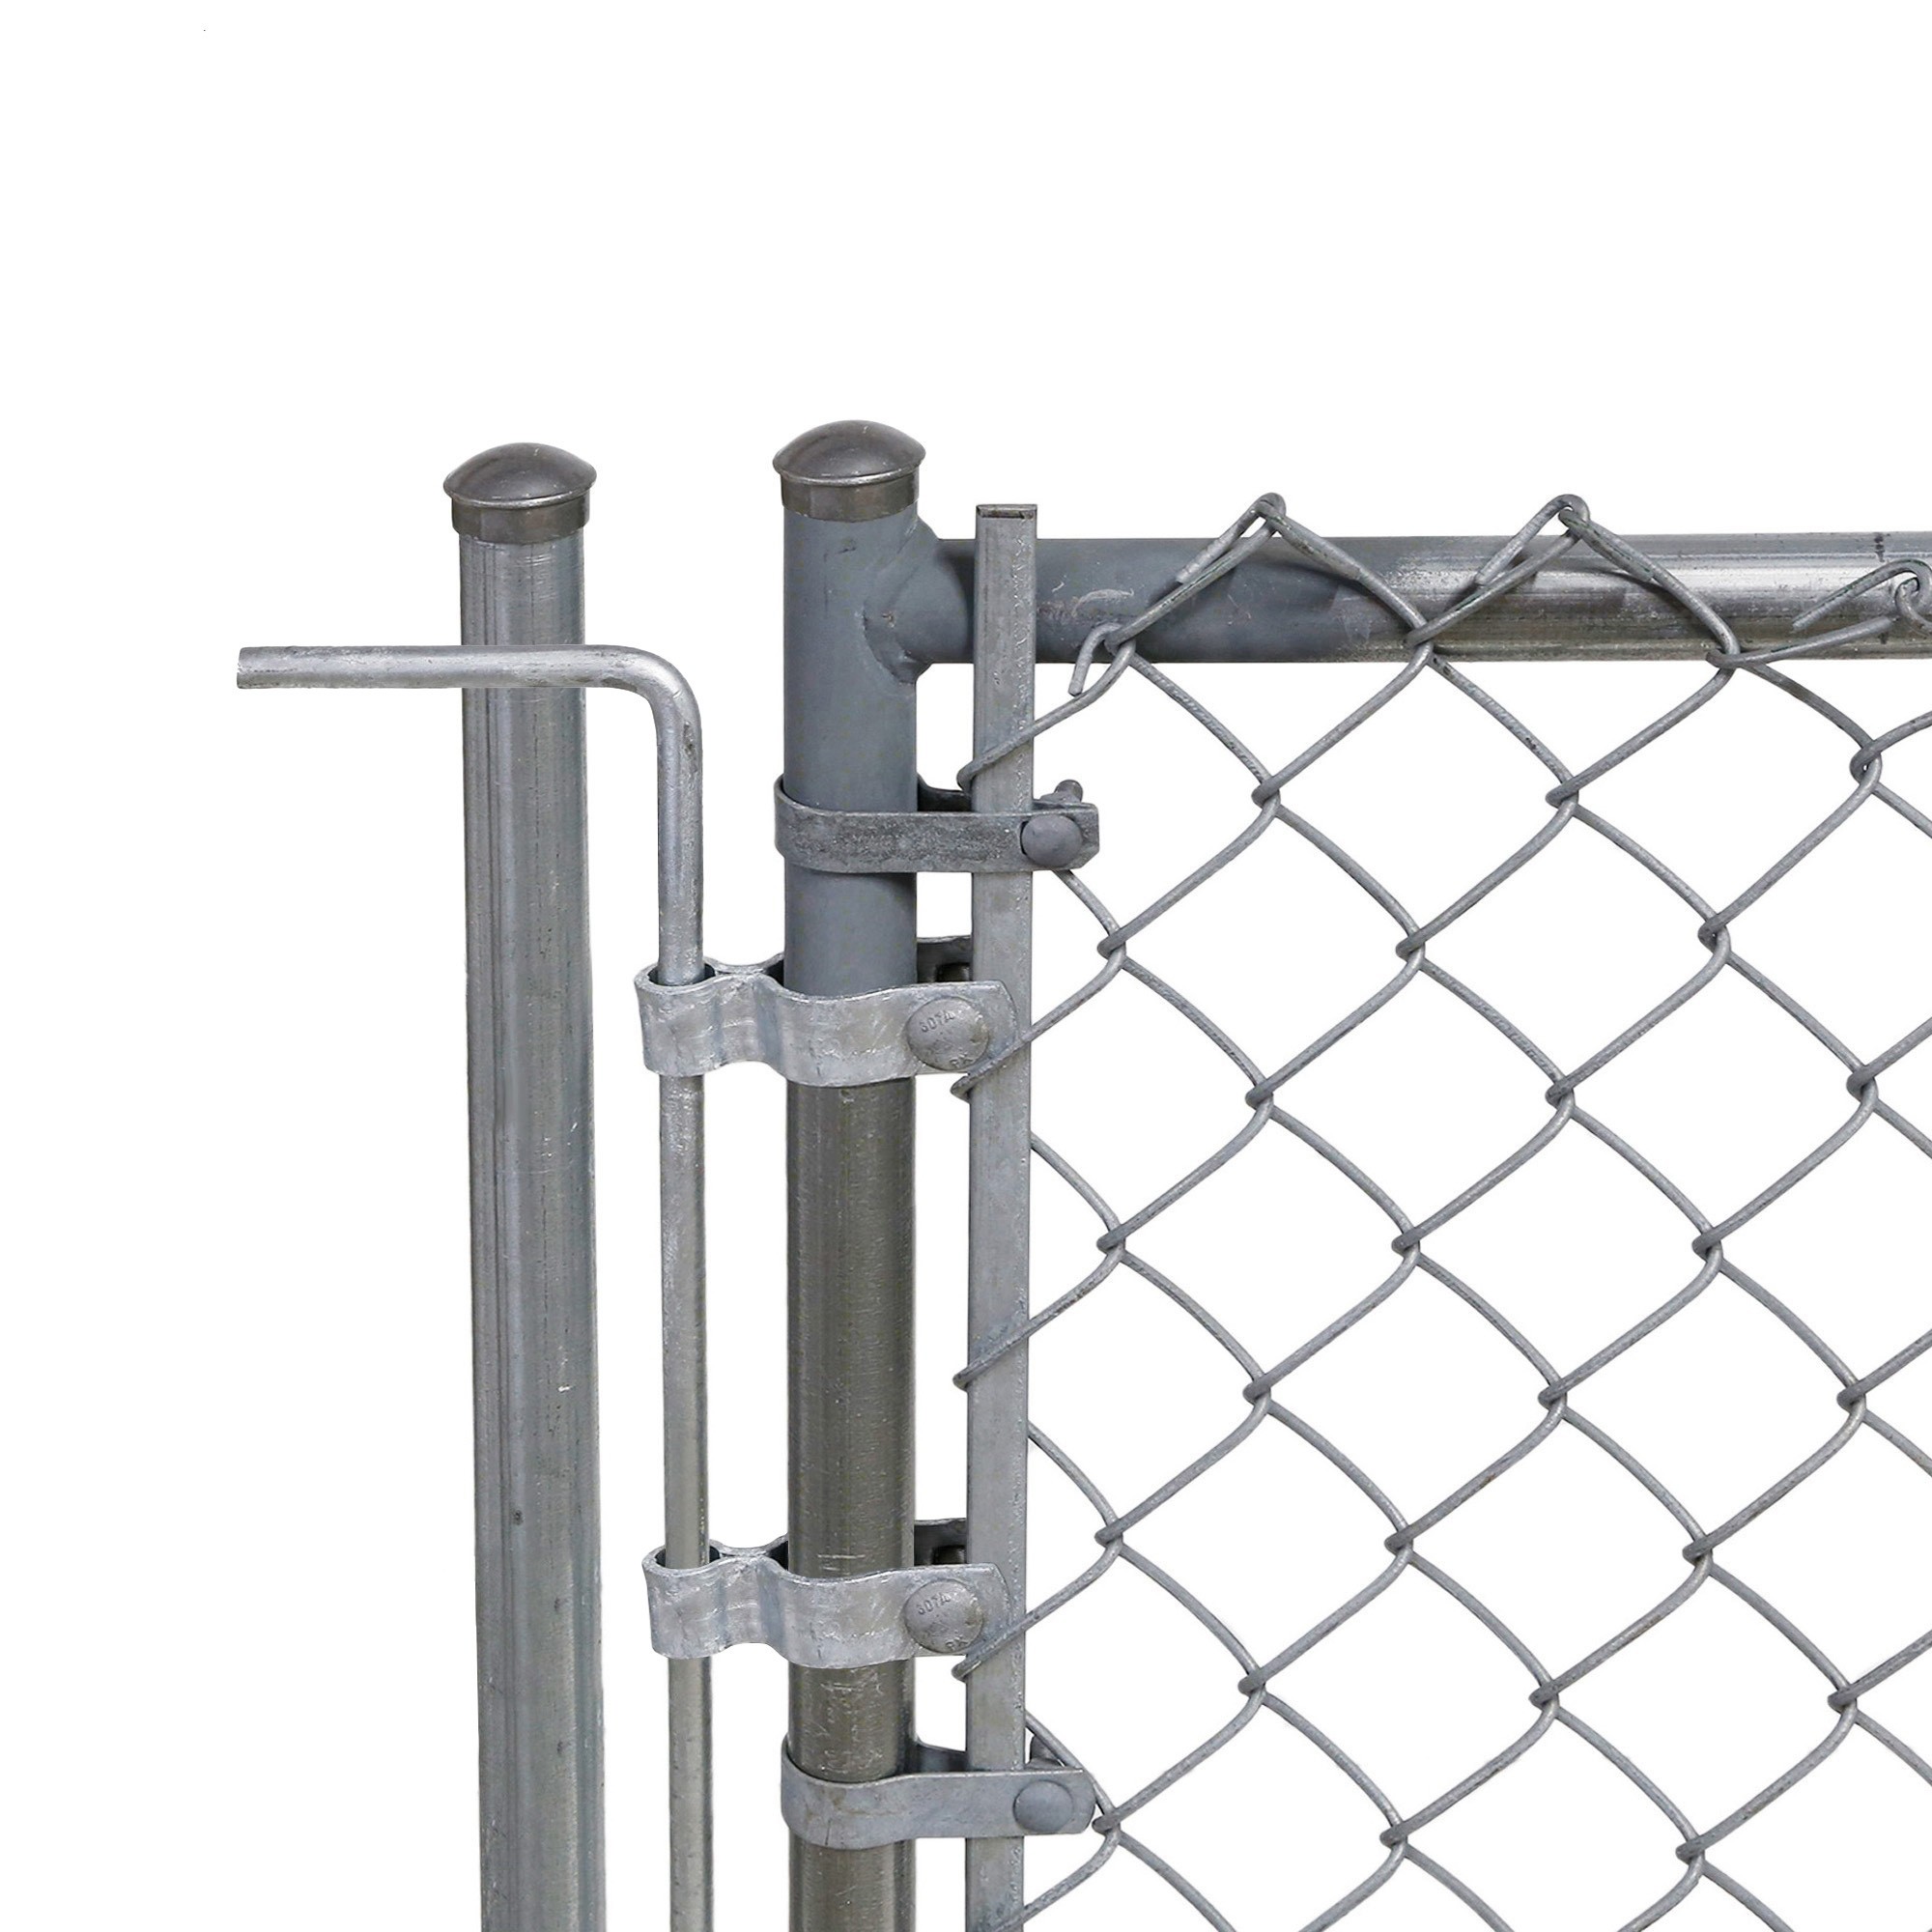 Galvanized Chain Link Fence Kit - Includes All Parts